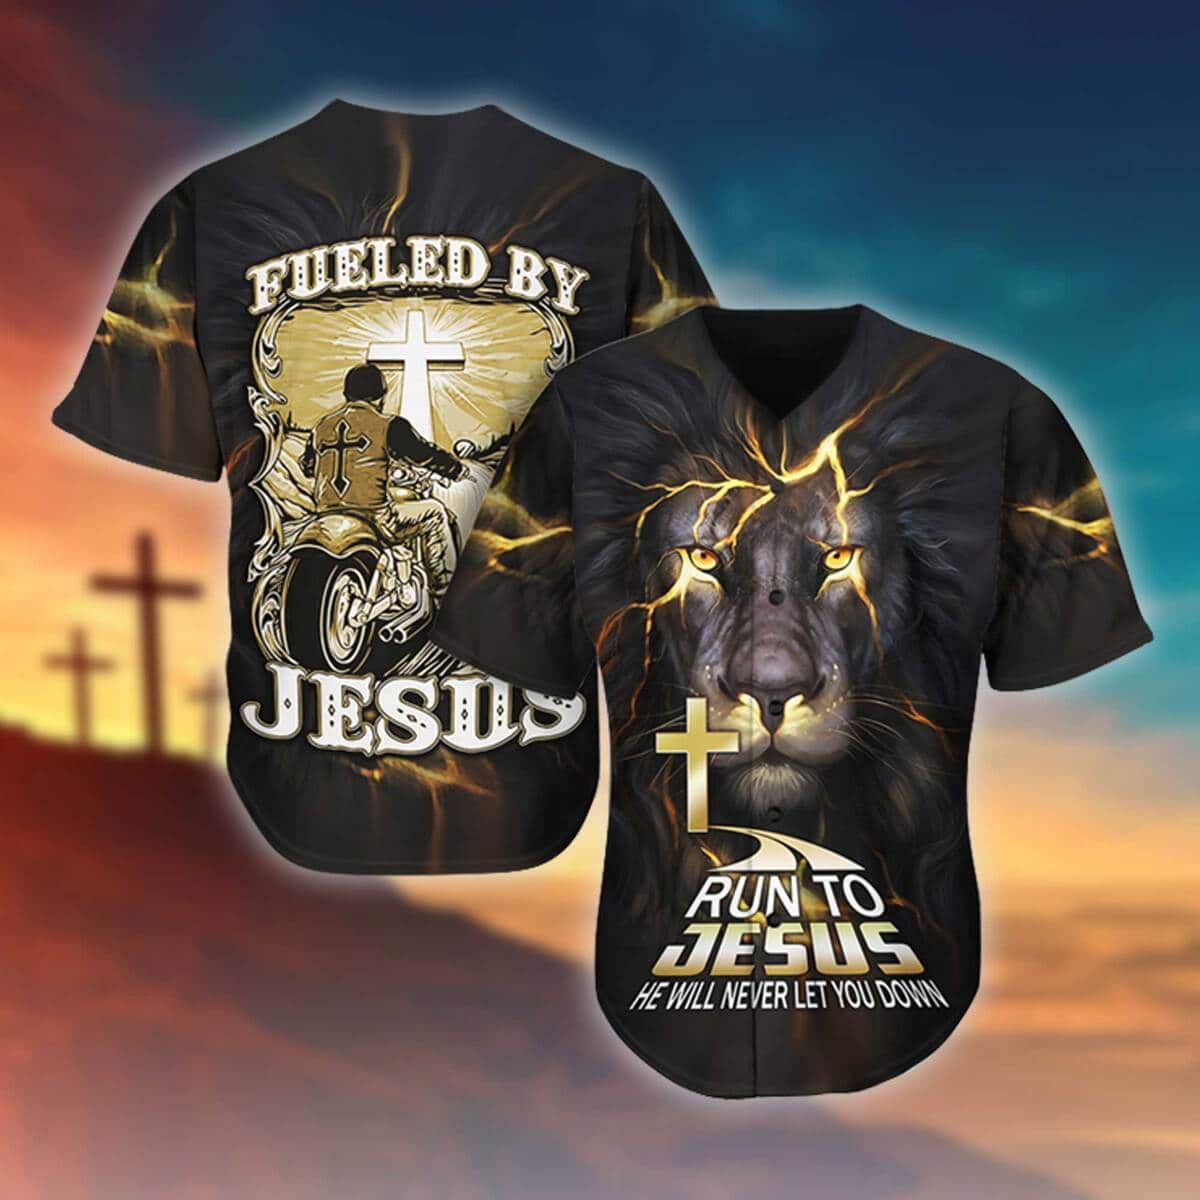 Fueled By Jesus Christian Baseball Jersey Run To Jesus He Will Never Let You Down